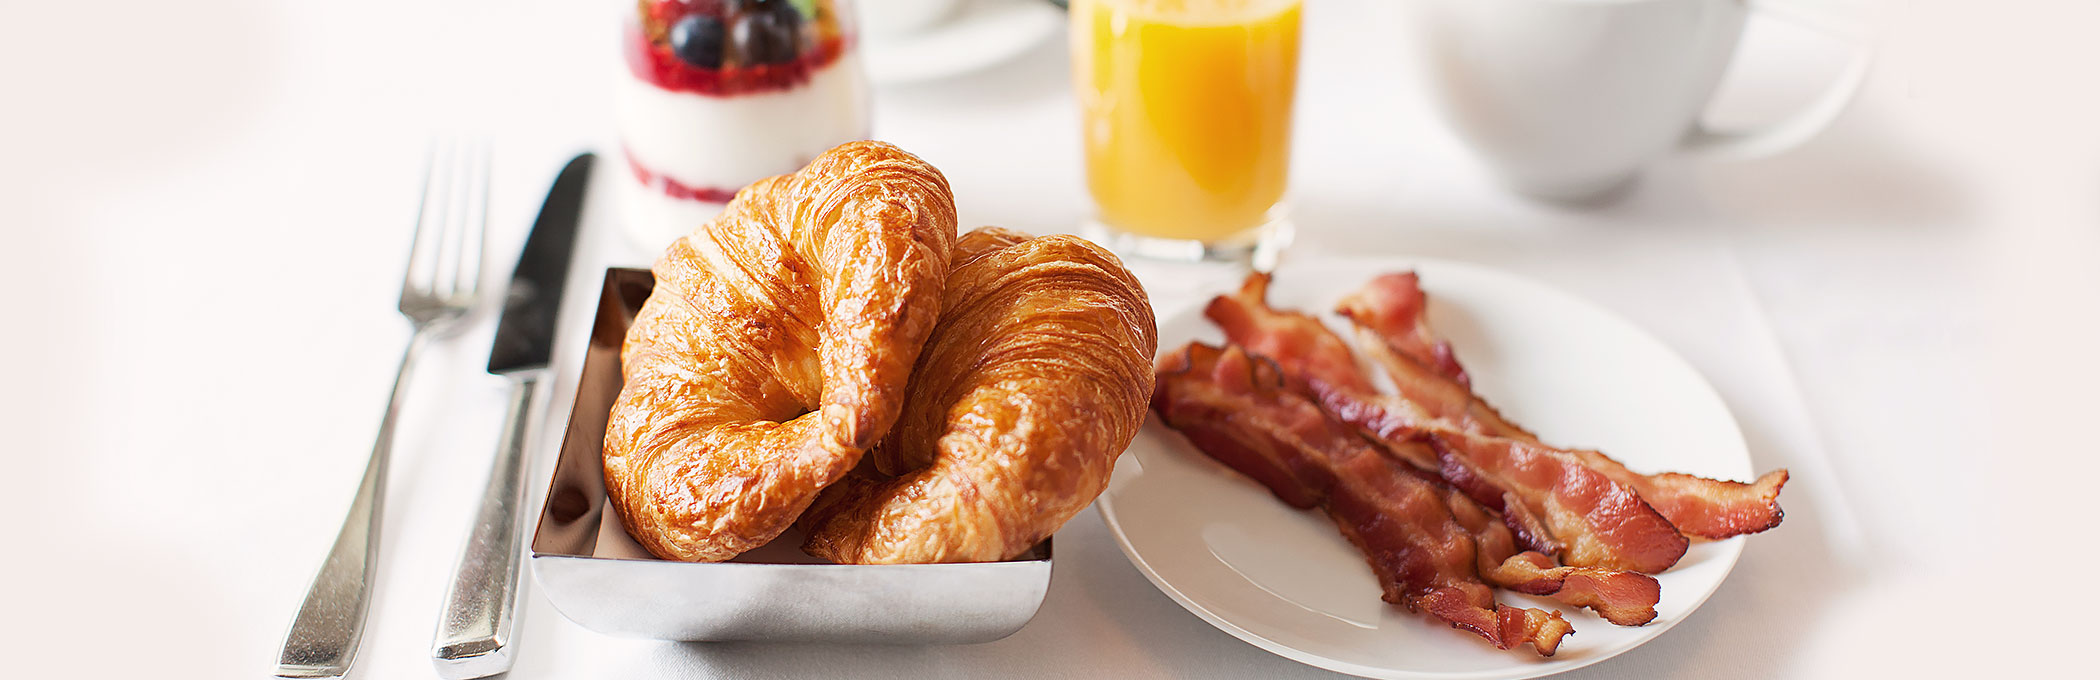 croissants and bacon breakfast